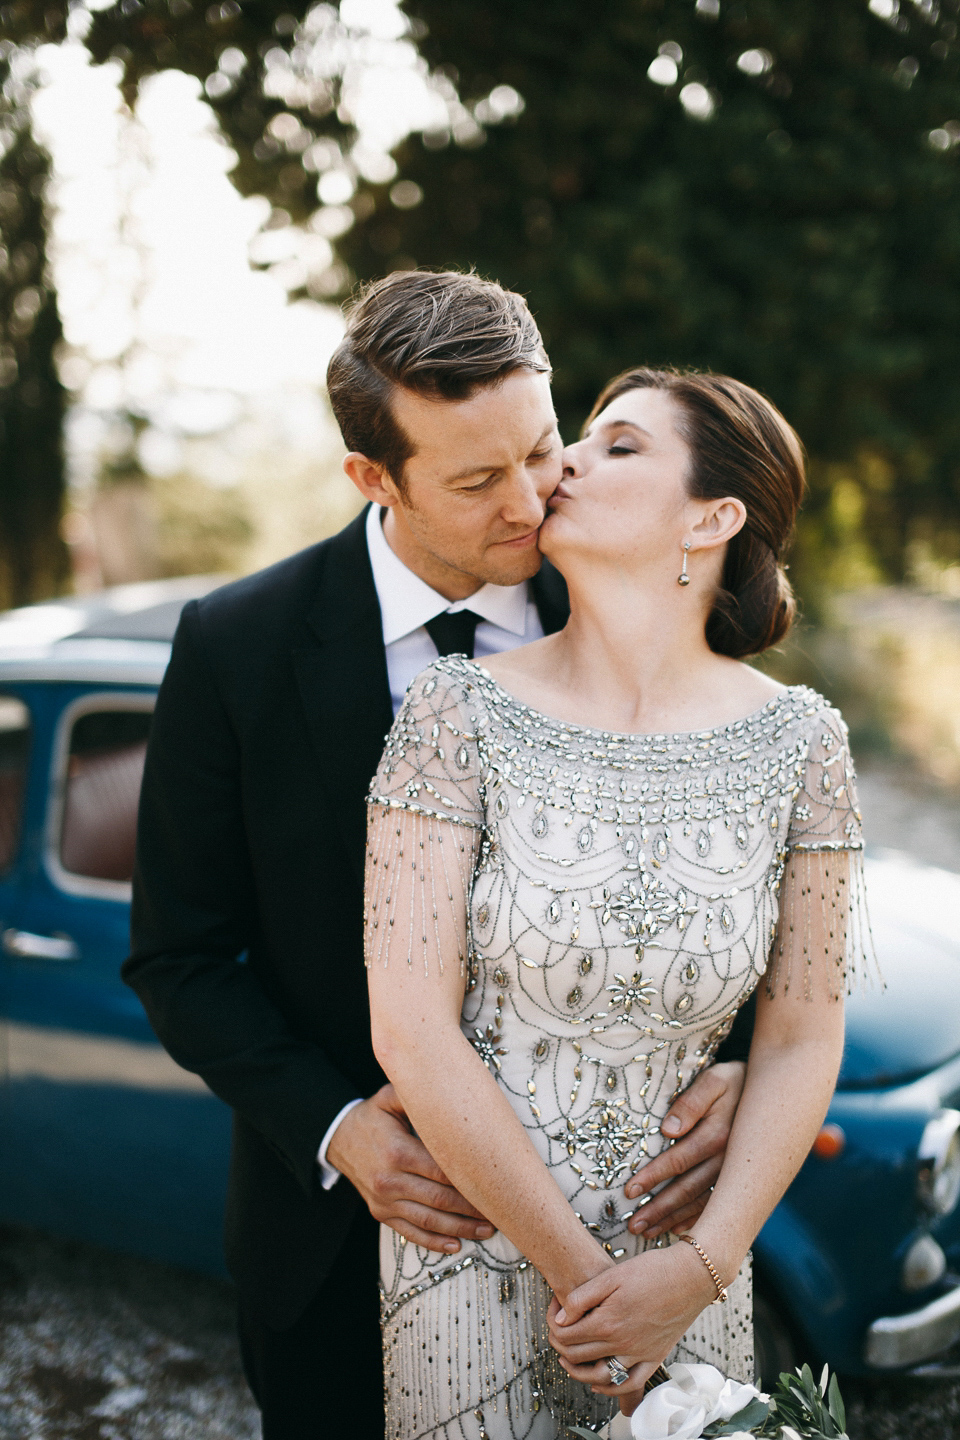 Amelia wore a beaded gown by Eliza Jane Howell for her September wedding in Tuscany. Photograph by Matteo Crescentini, styling and wedding planning by The Knot Italy.